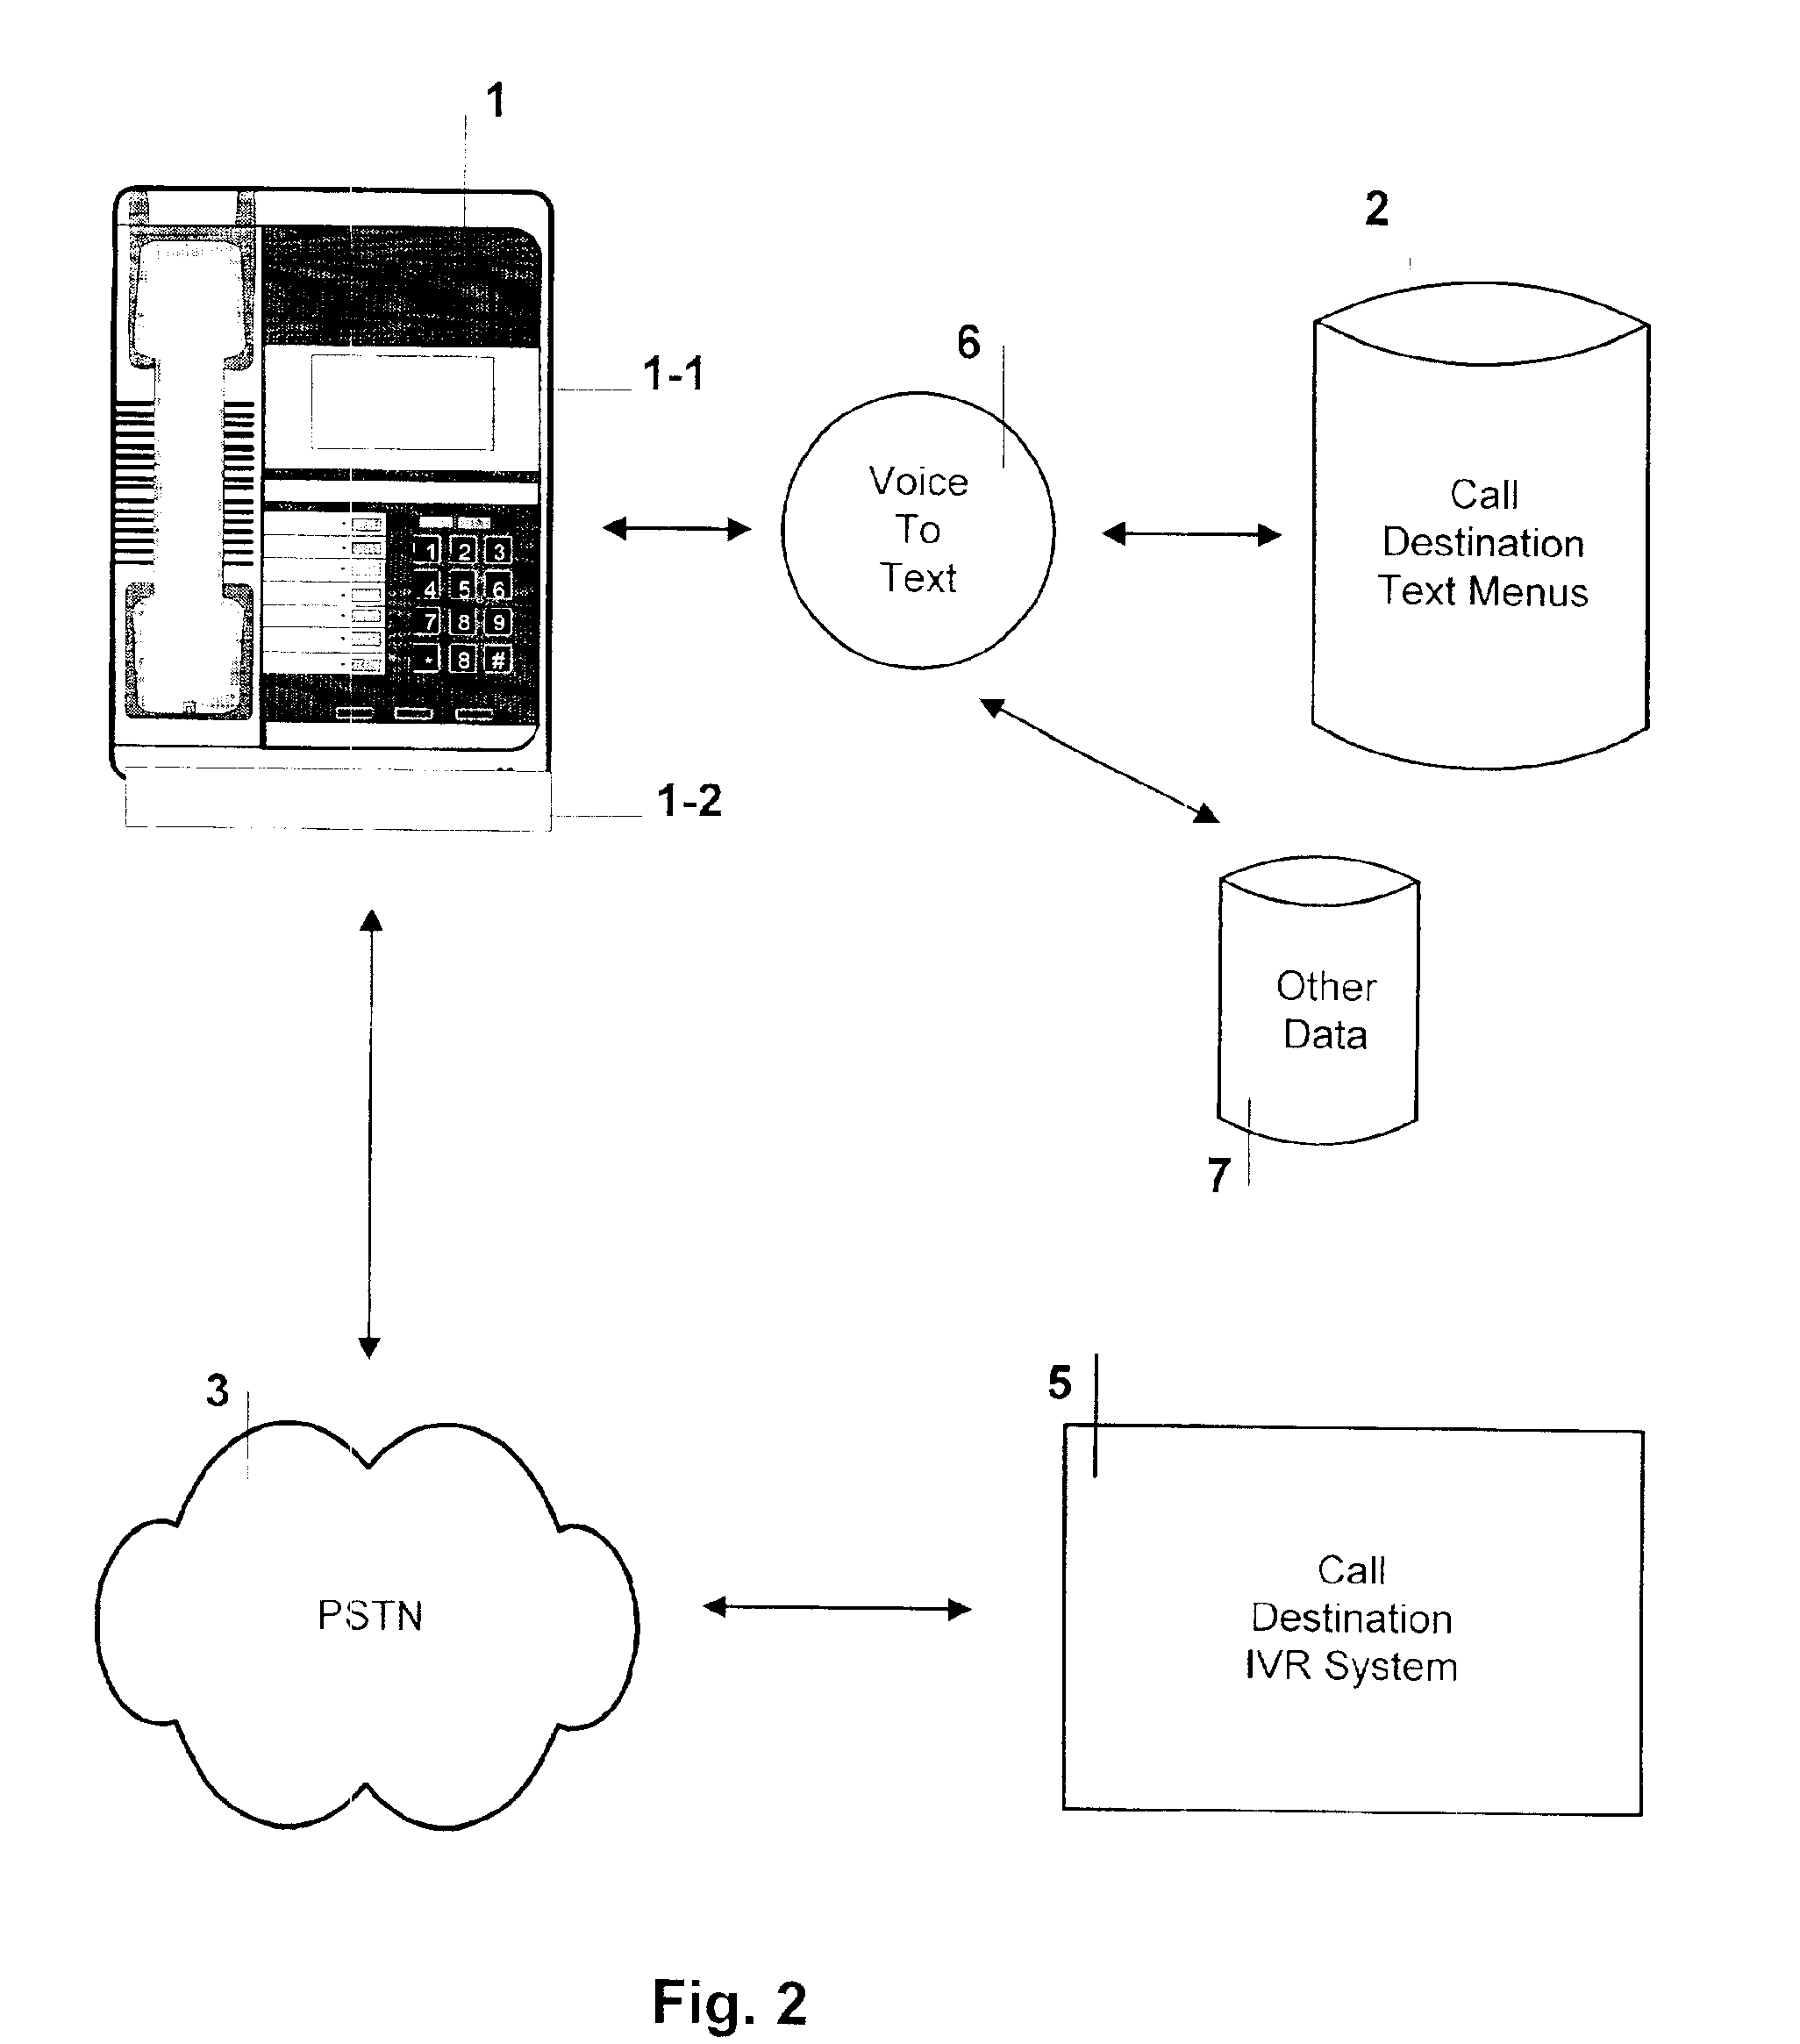 System and method for integrating the visual display of text menus for interactive voice response systems